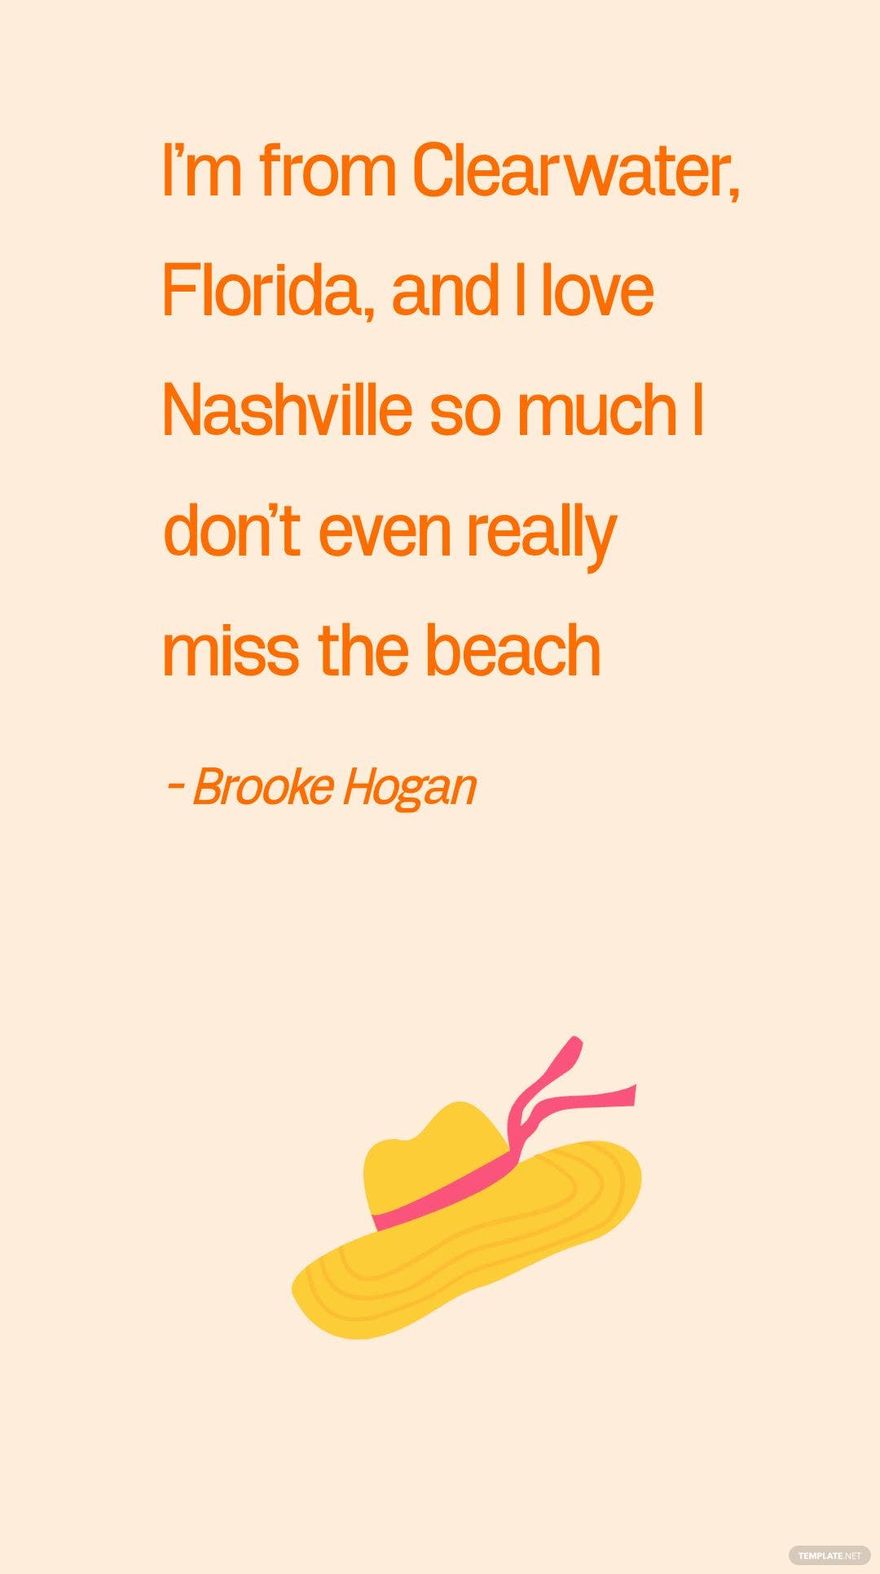 Brooke Hogan - I'm from Clearwater, Florida, and I love Nashville so much I don't even really miss the beach